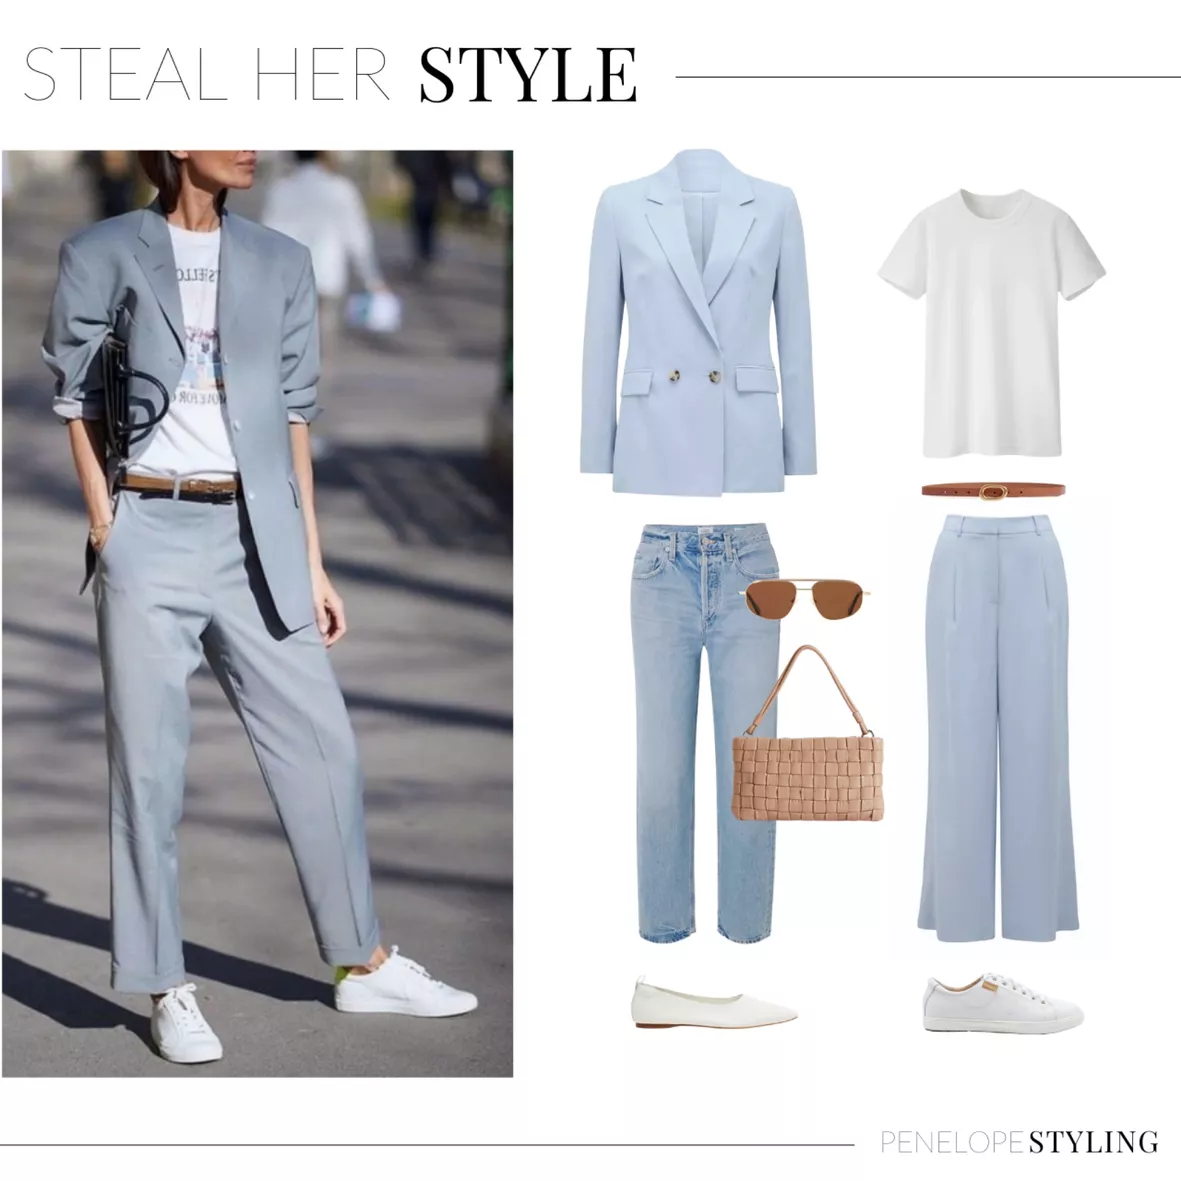 Light Blue Suit with Sneakers Outfits For Women (2 ideas & outfits